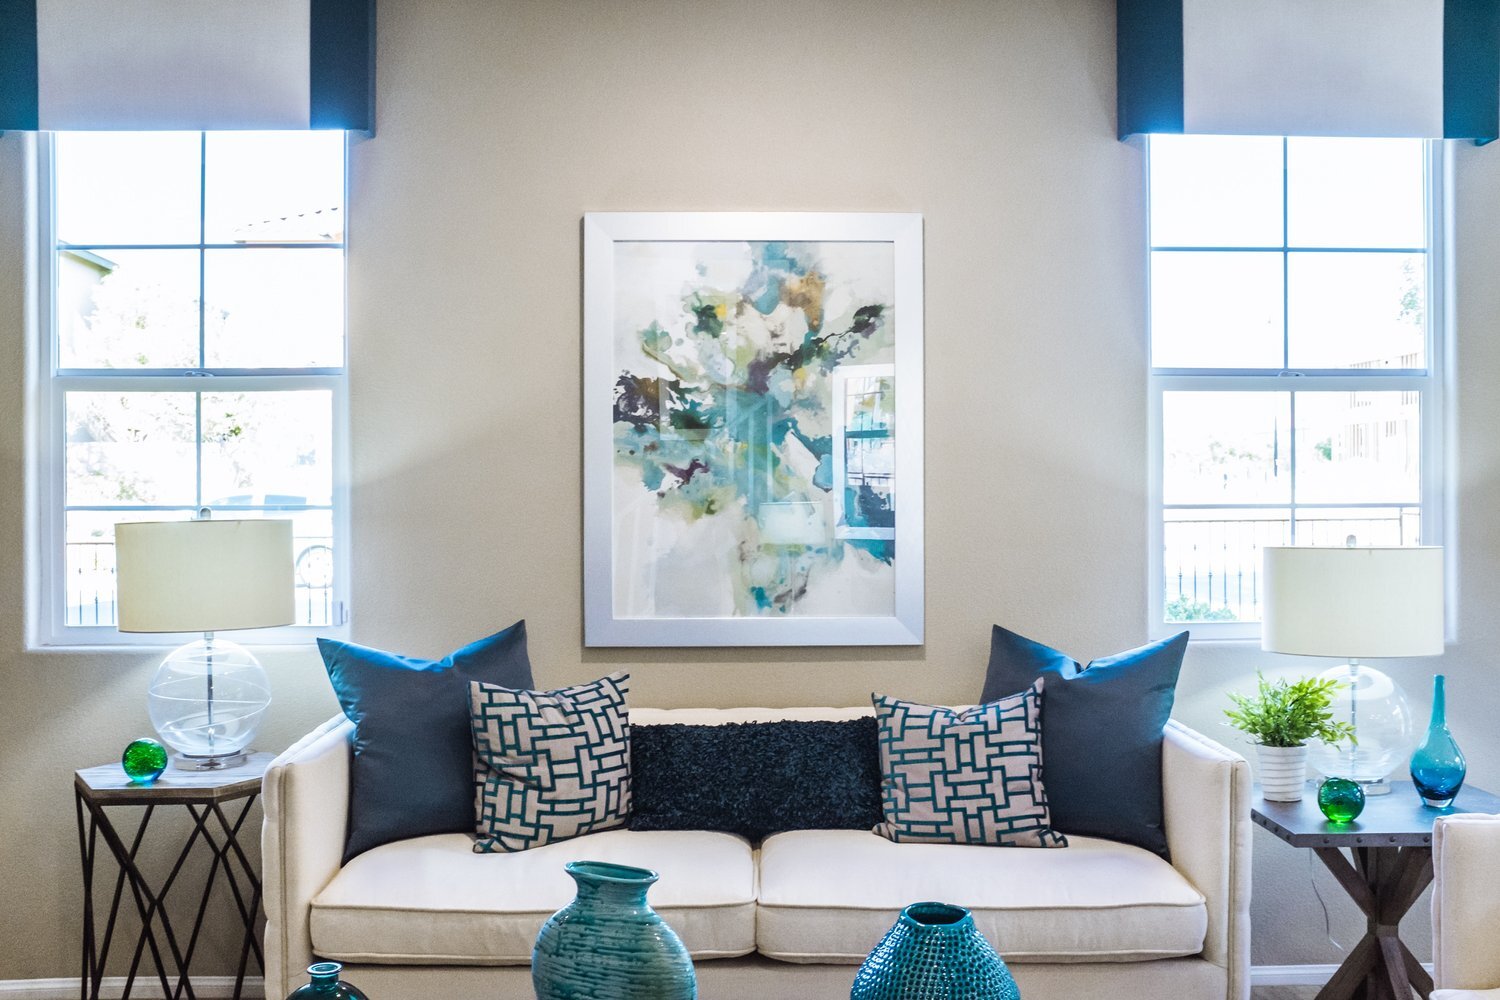 Living room with blue accents